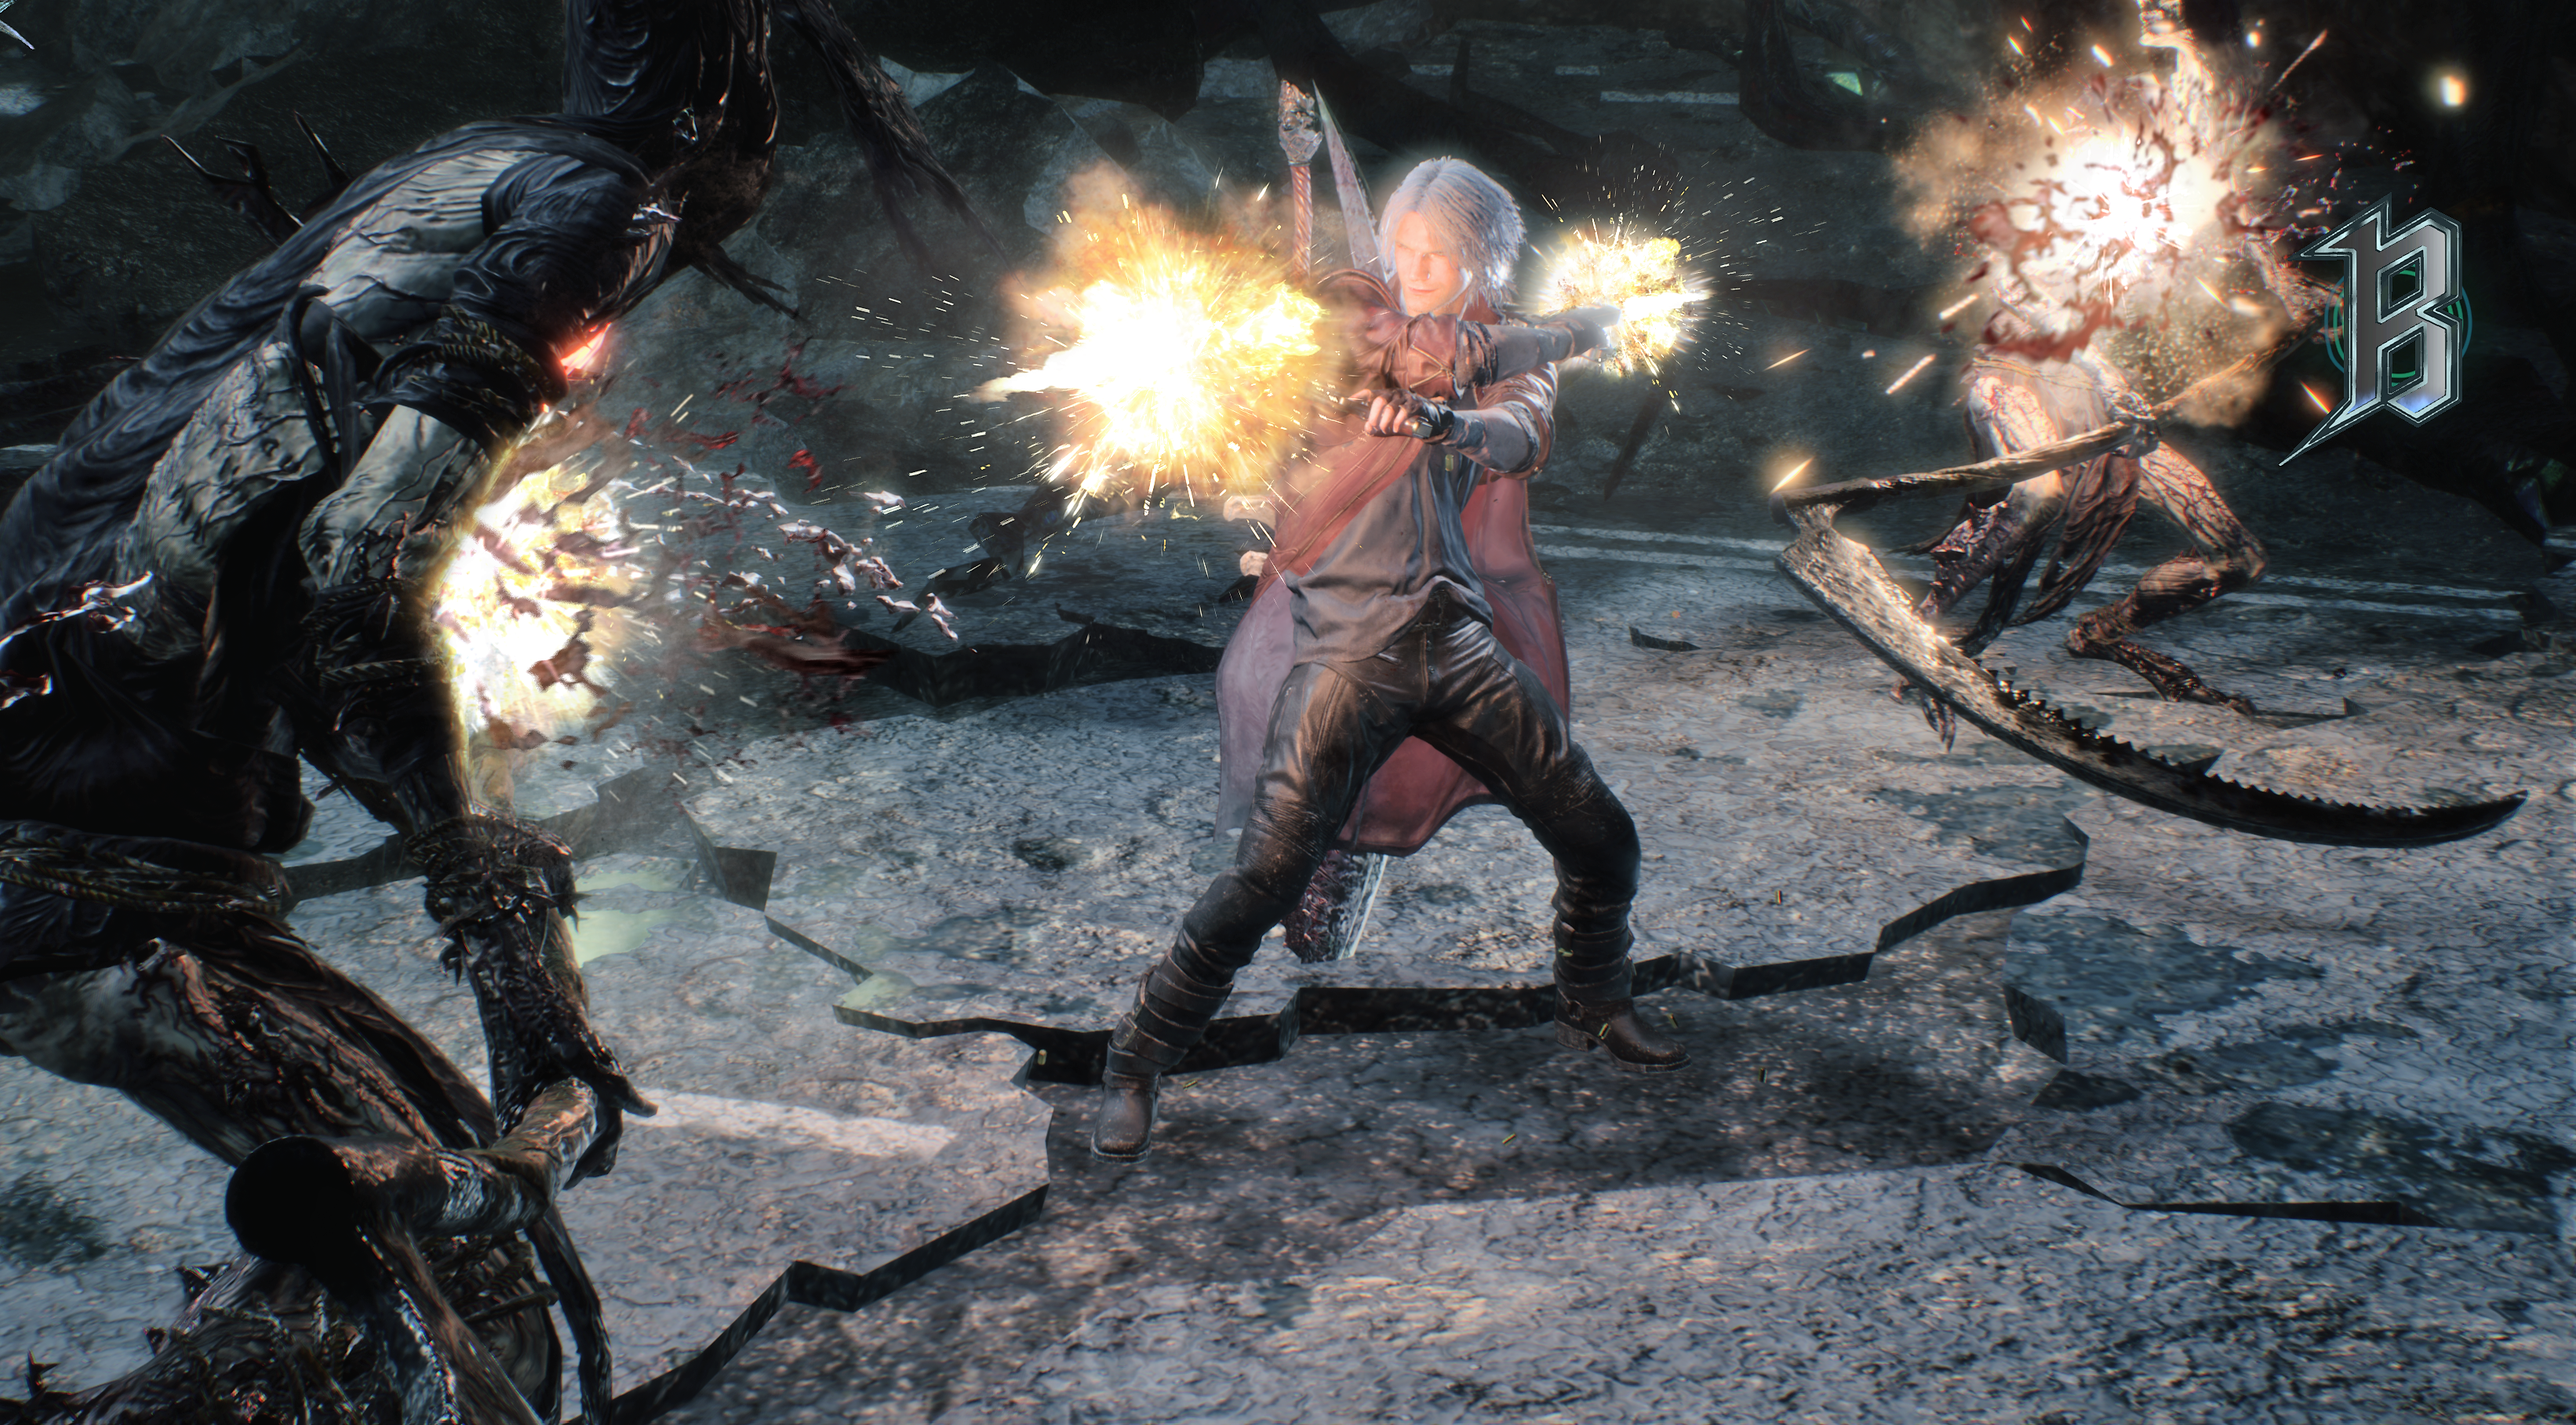 dmc devil may cry 5 crack only